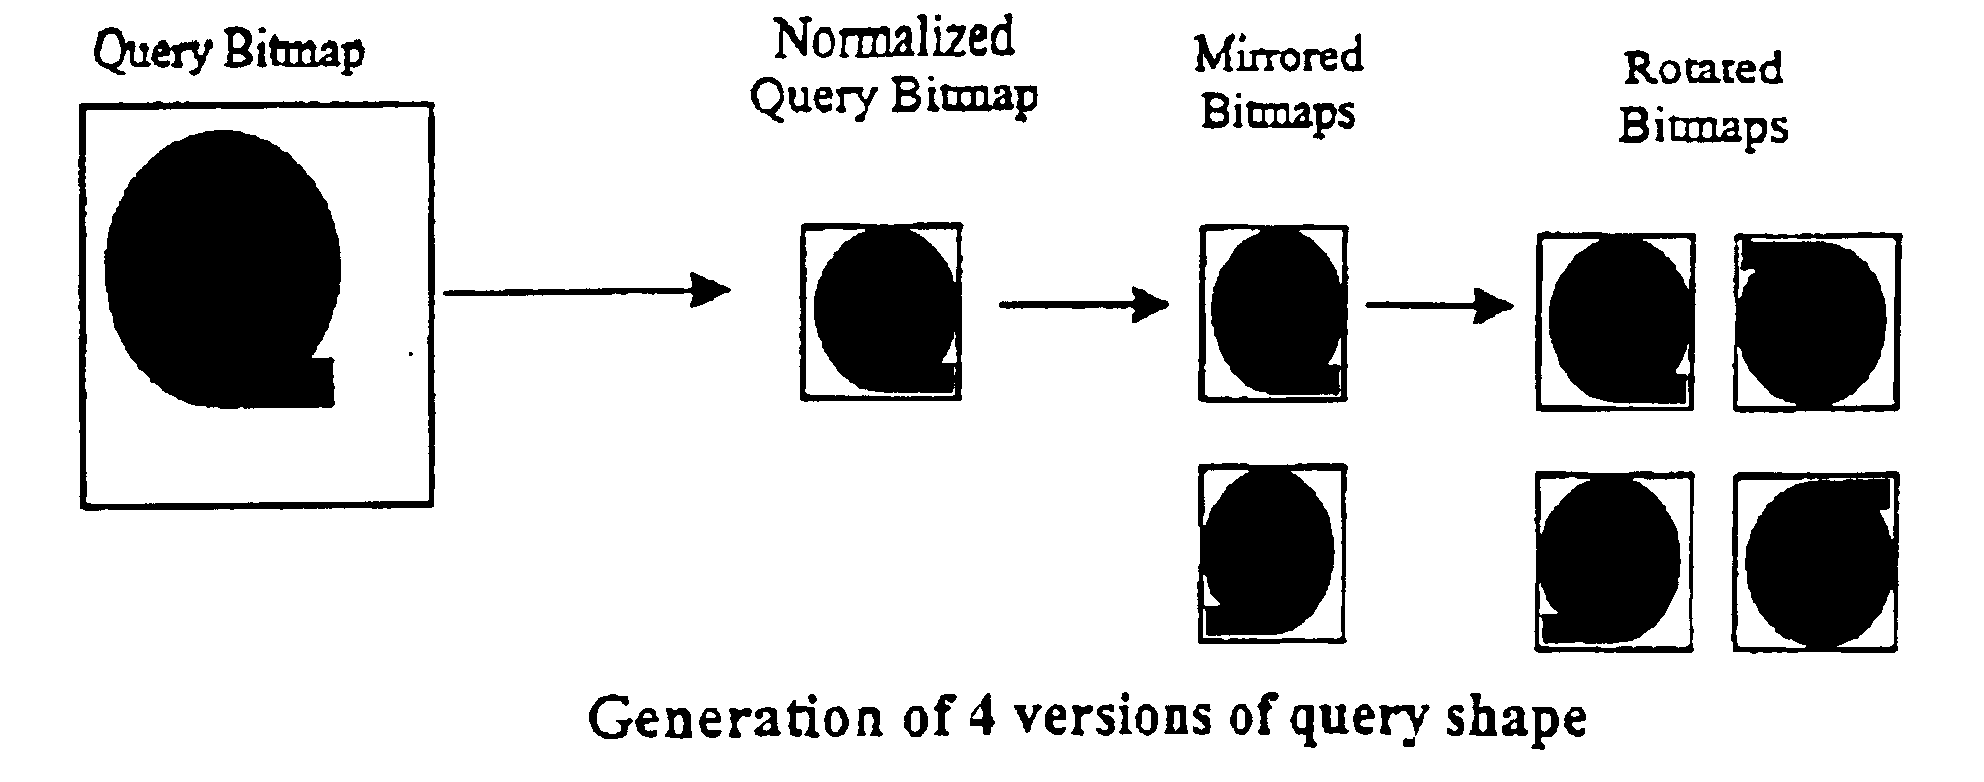 Normalized bitmap representation of visual object's shape for search/query/filtering applications